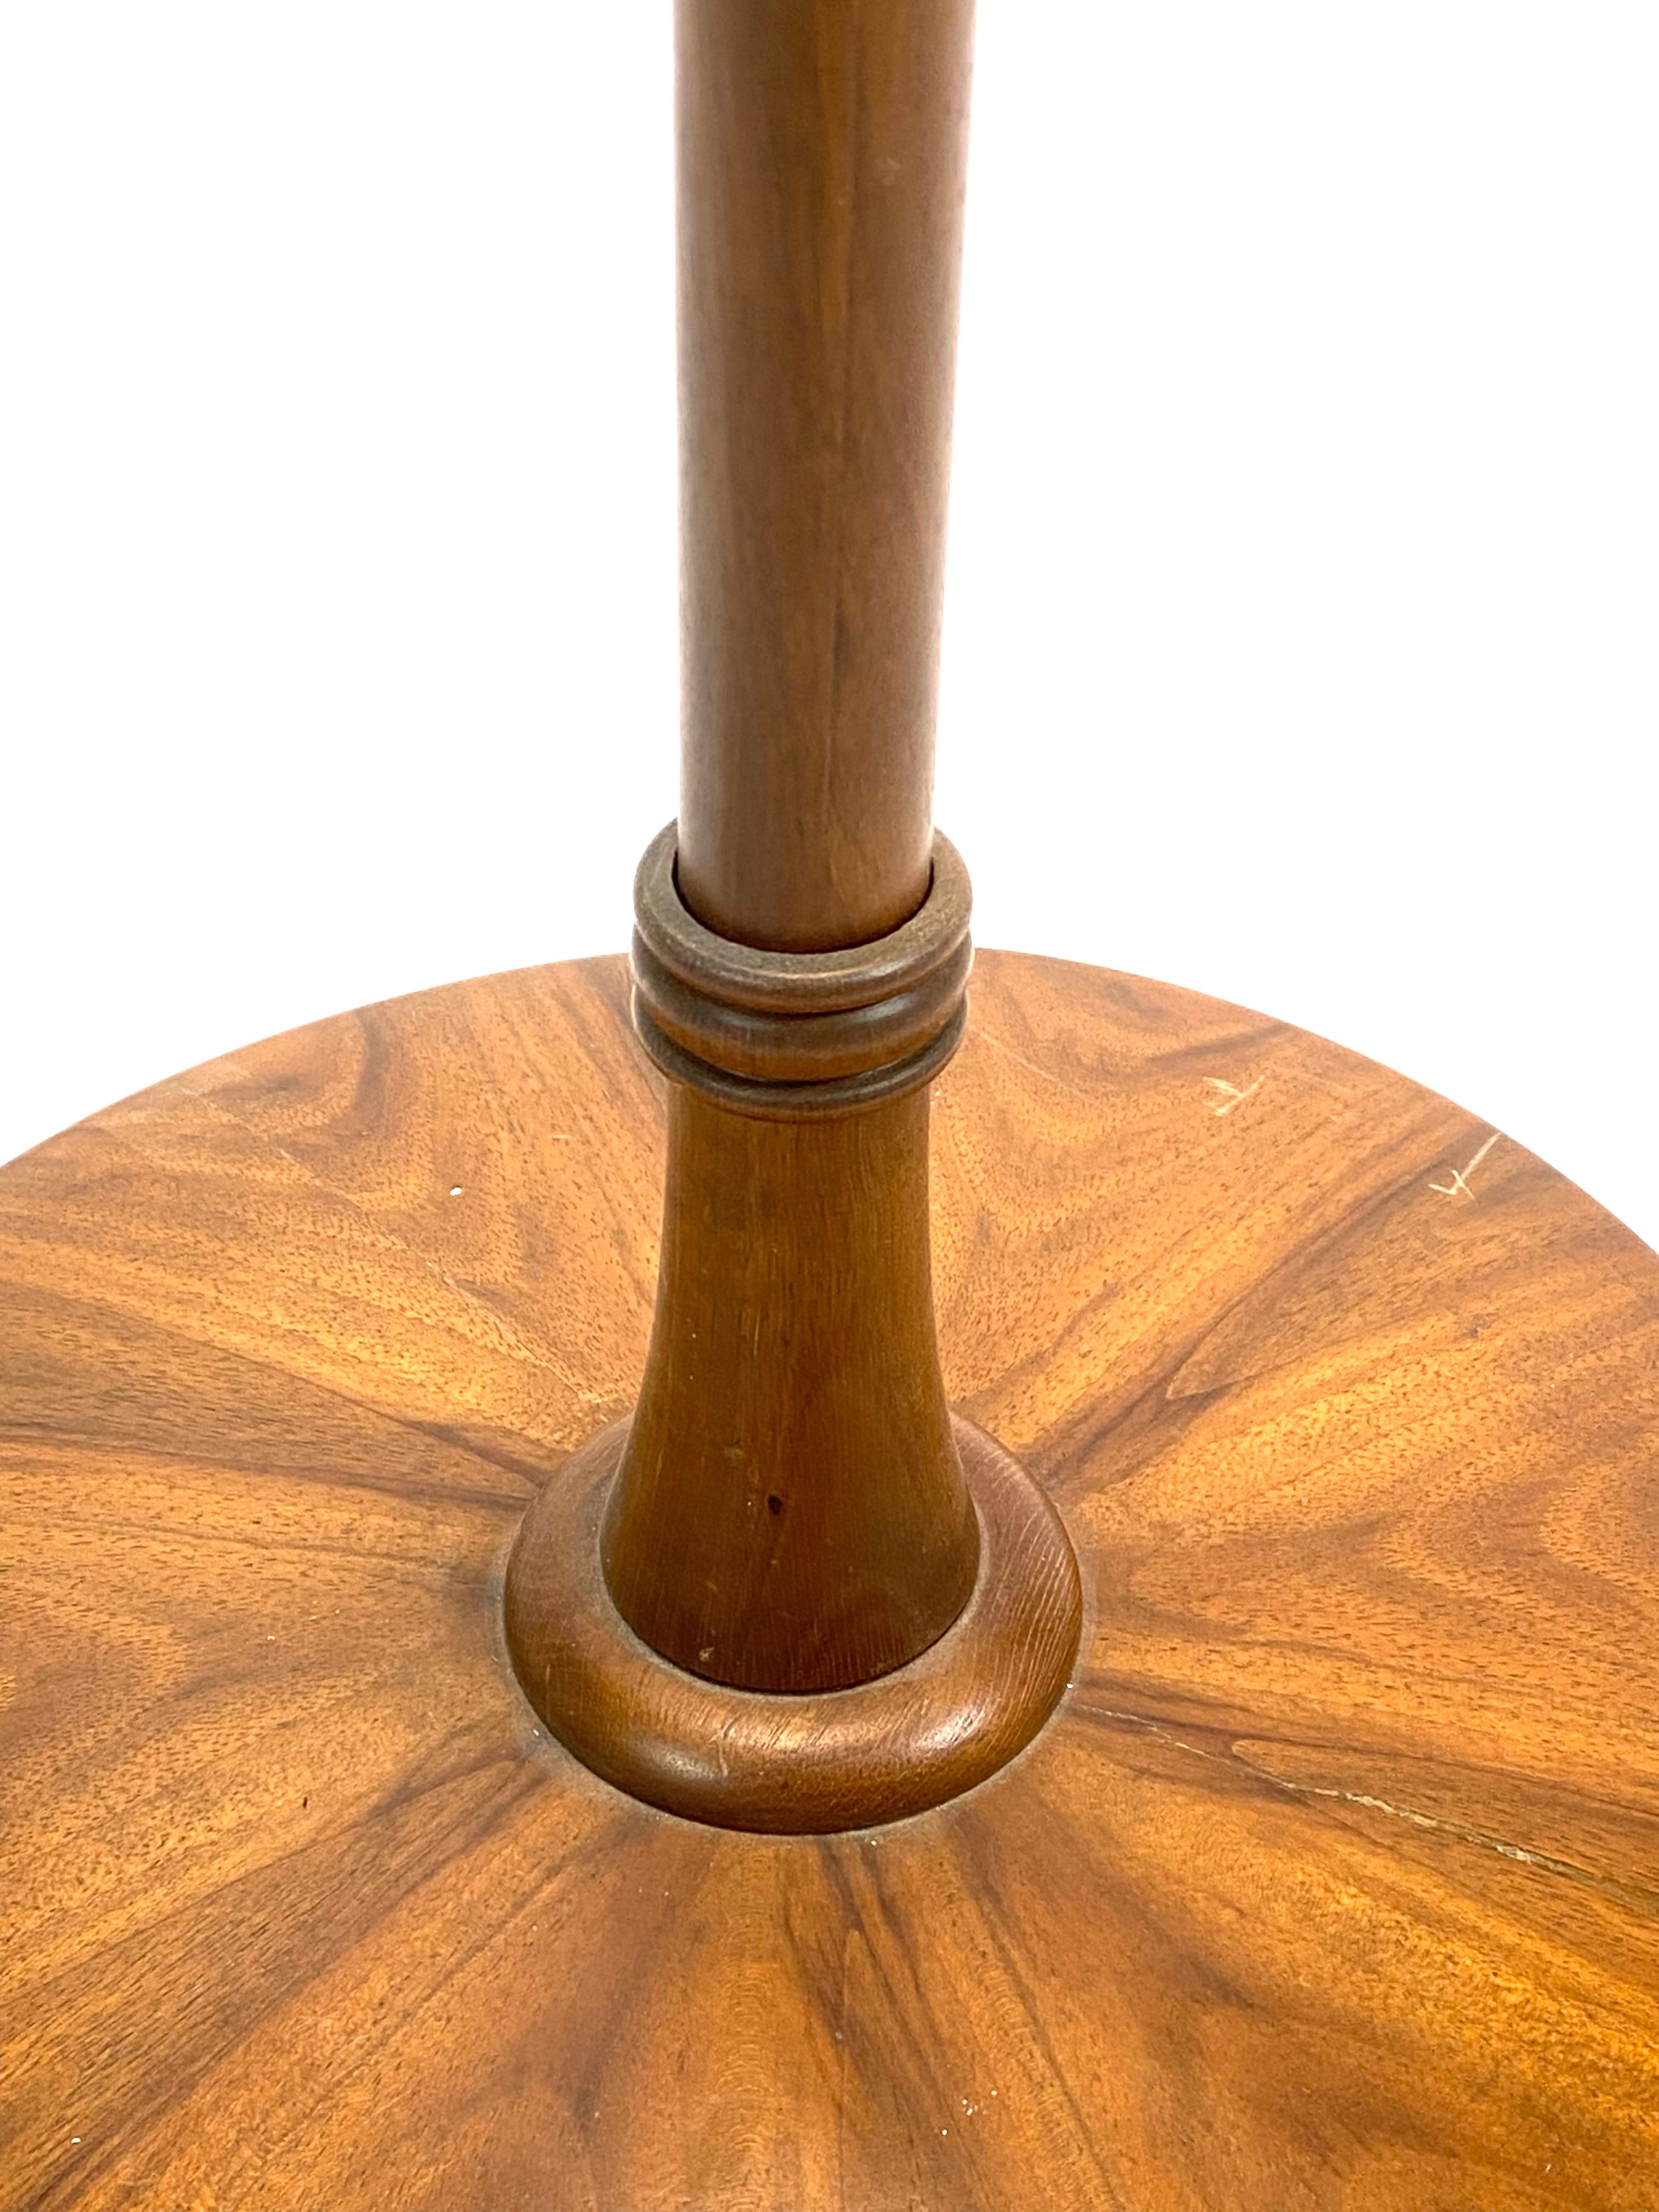 Floor lamp in walnut with paper shade, of Danish design from the 1960s. The lamp is in great vintage condition.